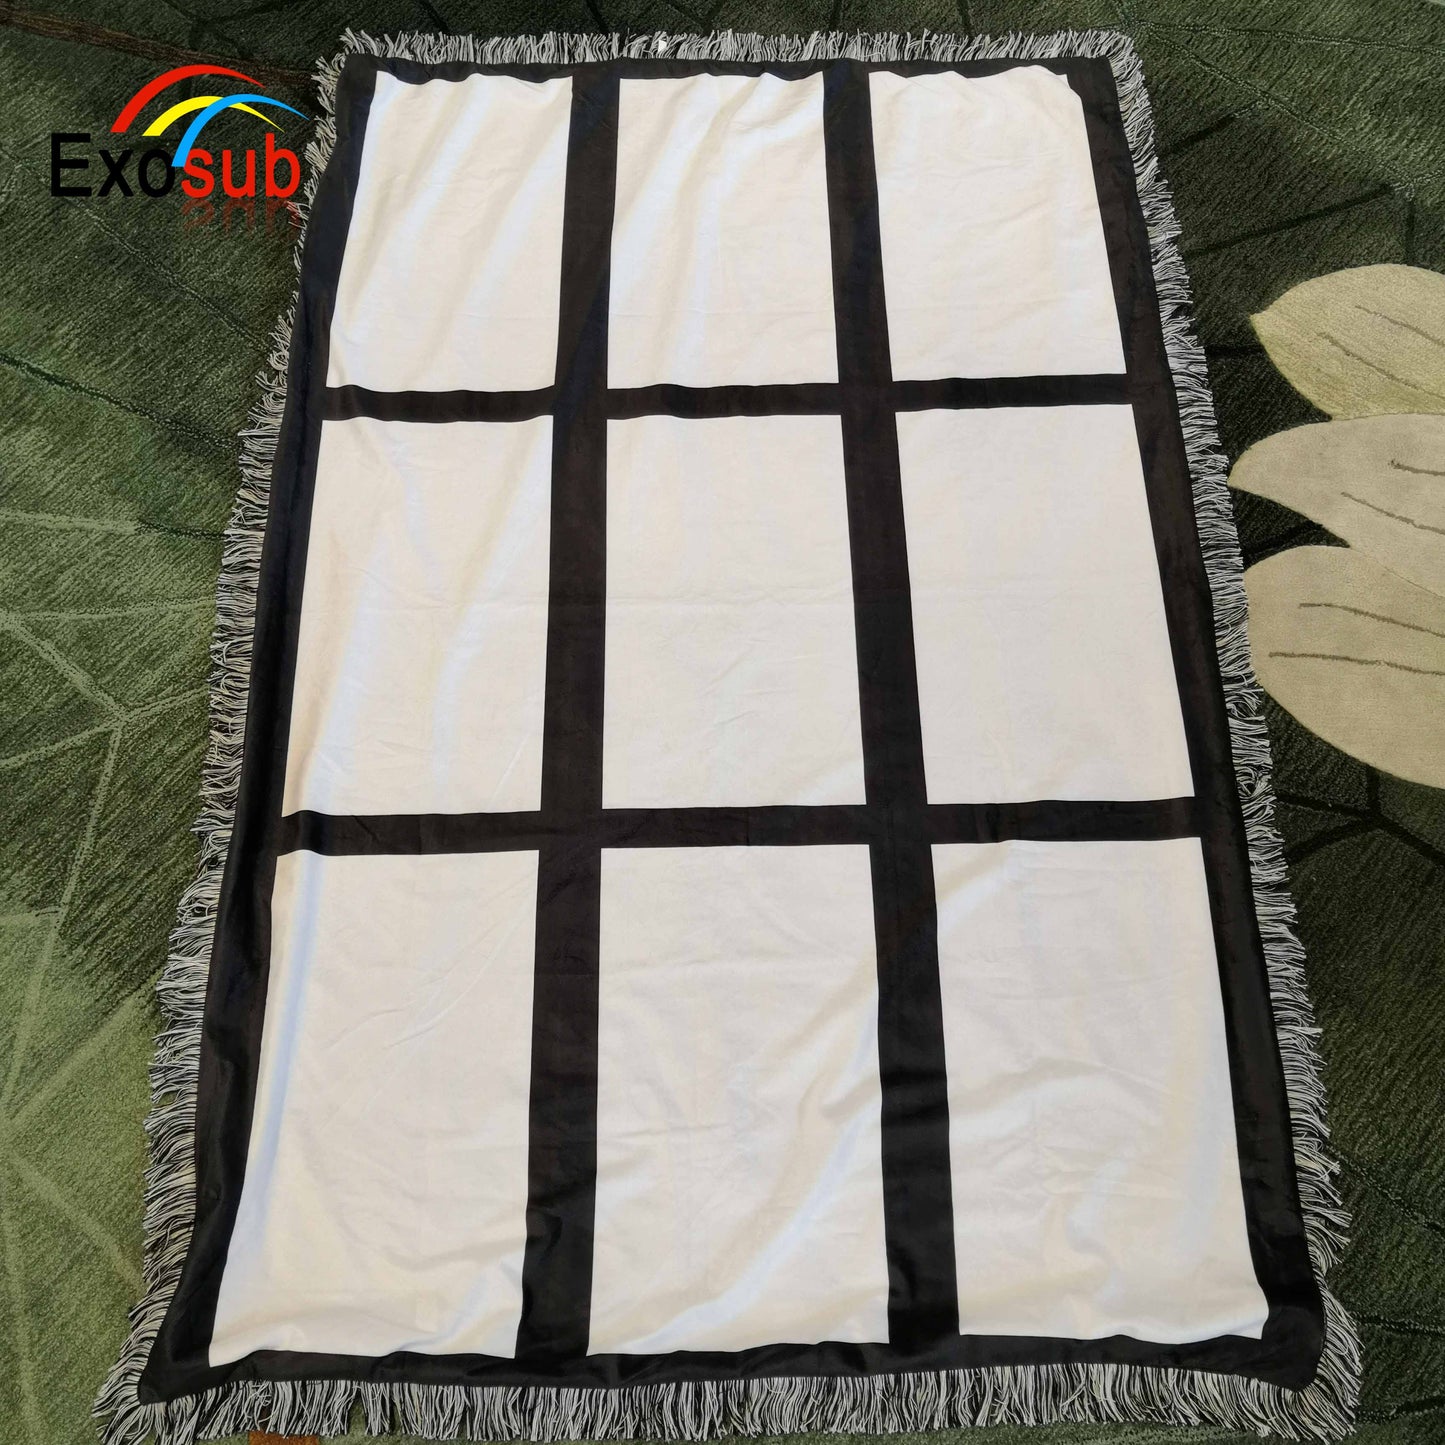 Wholesale 9 Panel Photo Sublimation Blanks Throw Blanket for Heat